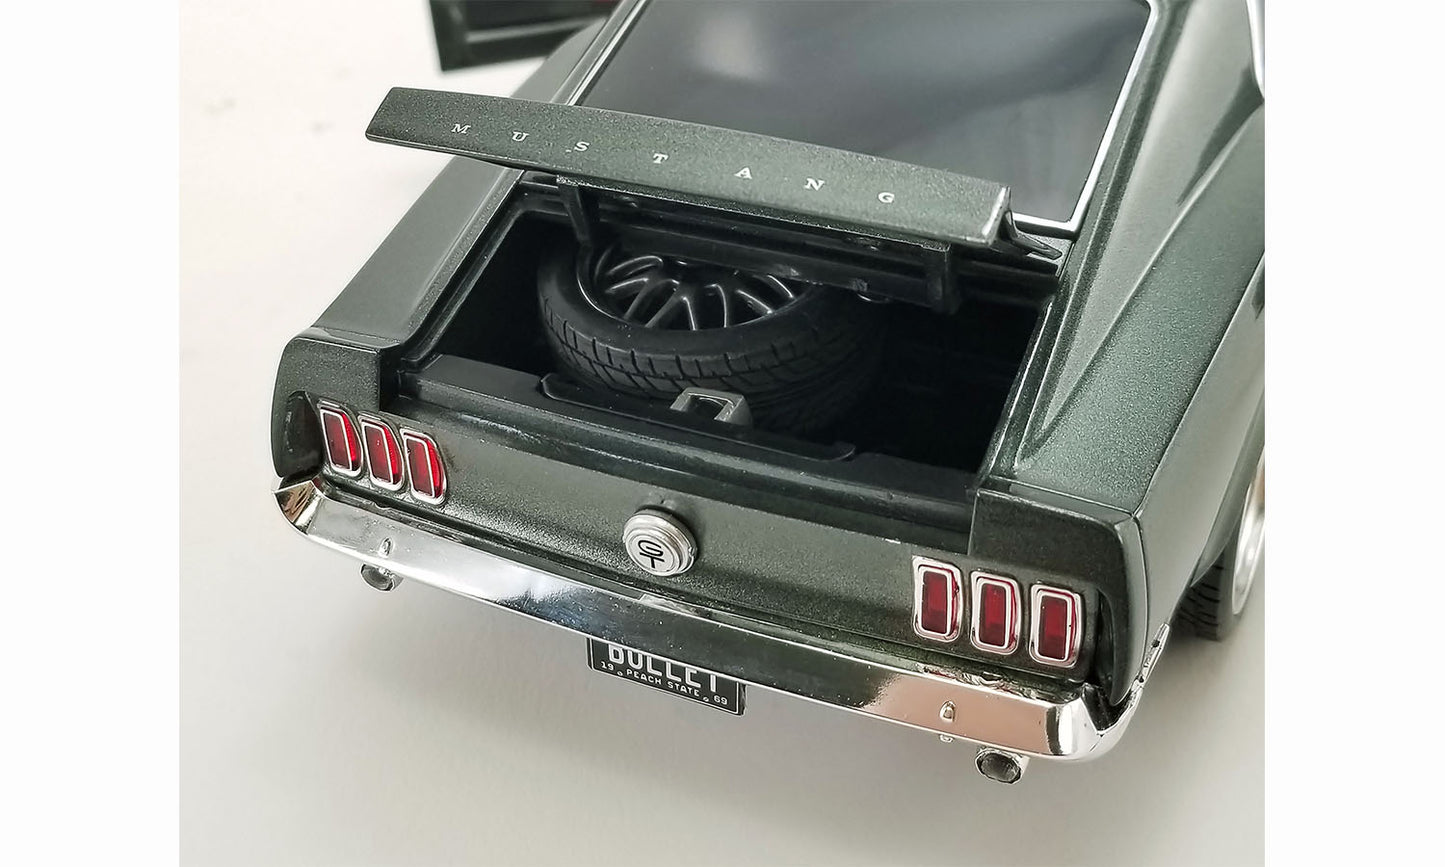 1969 Ford Mustang Bullet Edition 1:18 Acme